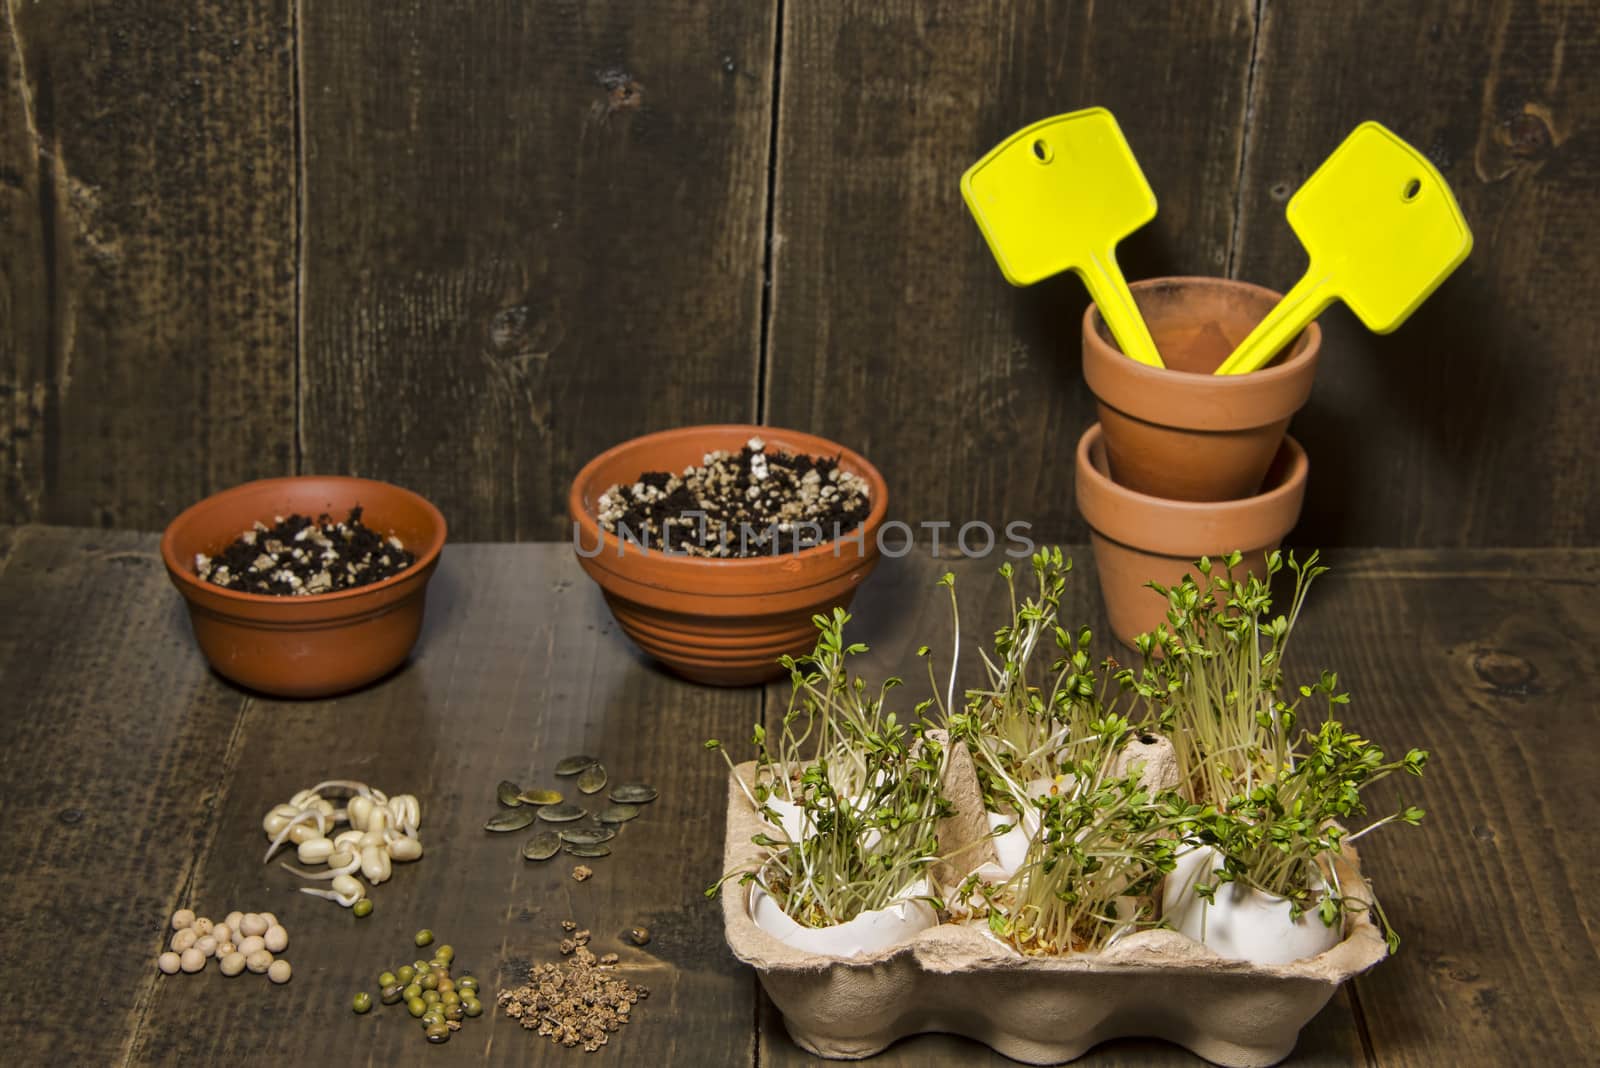 Seeds and pots by GryT